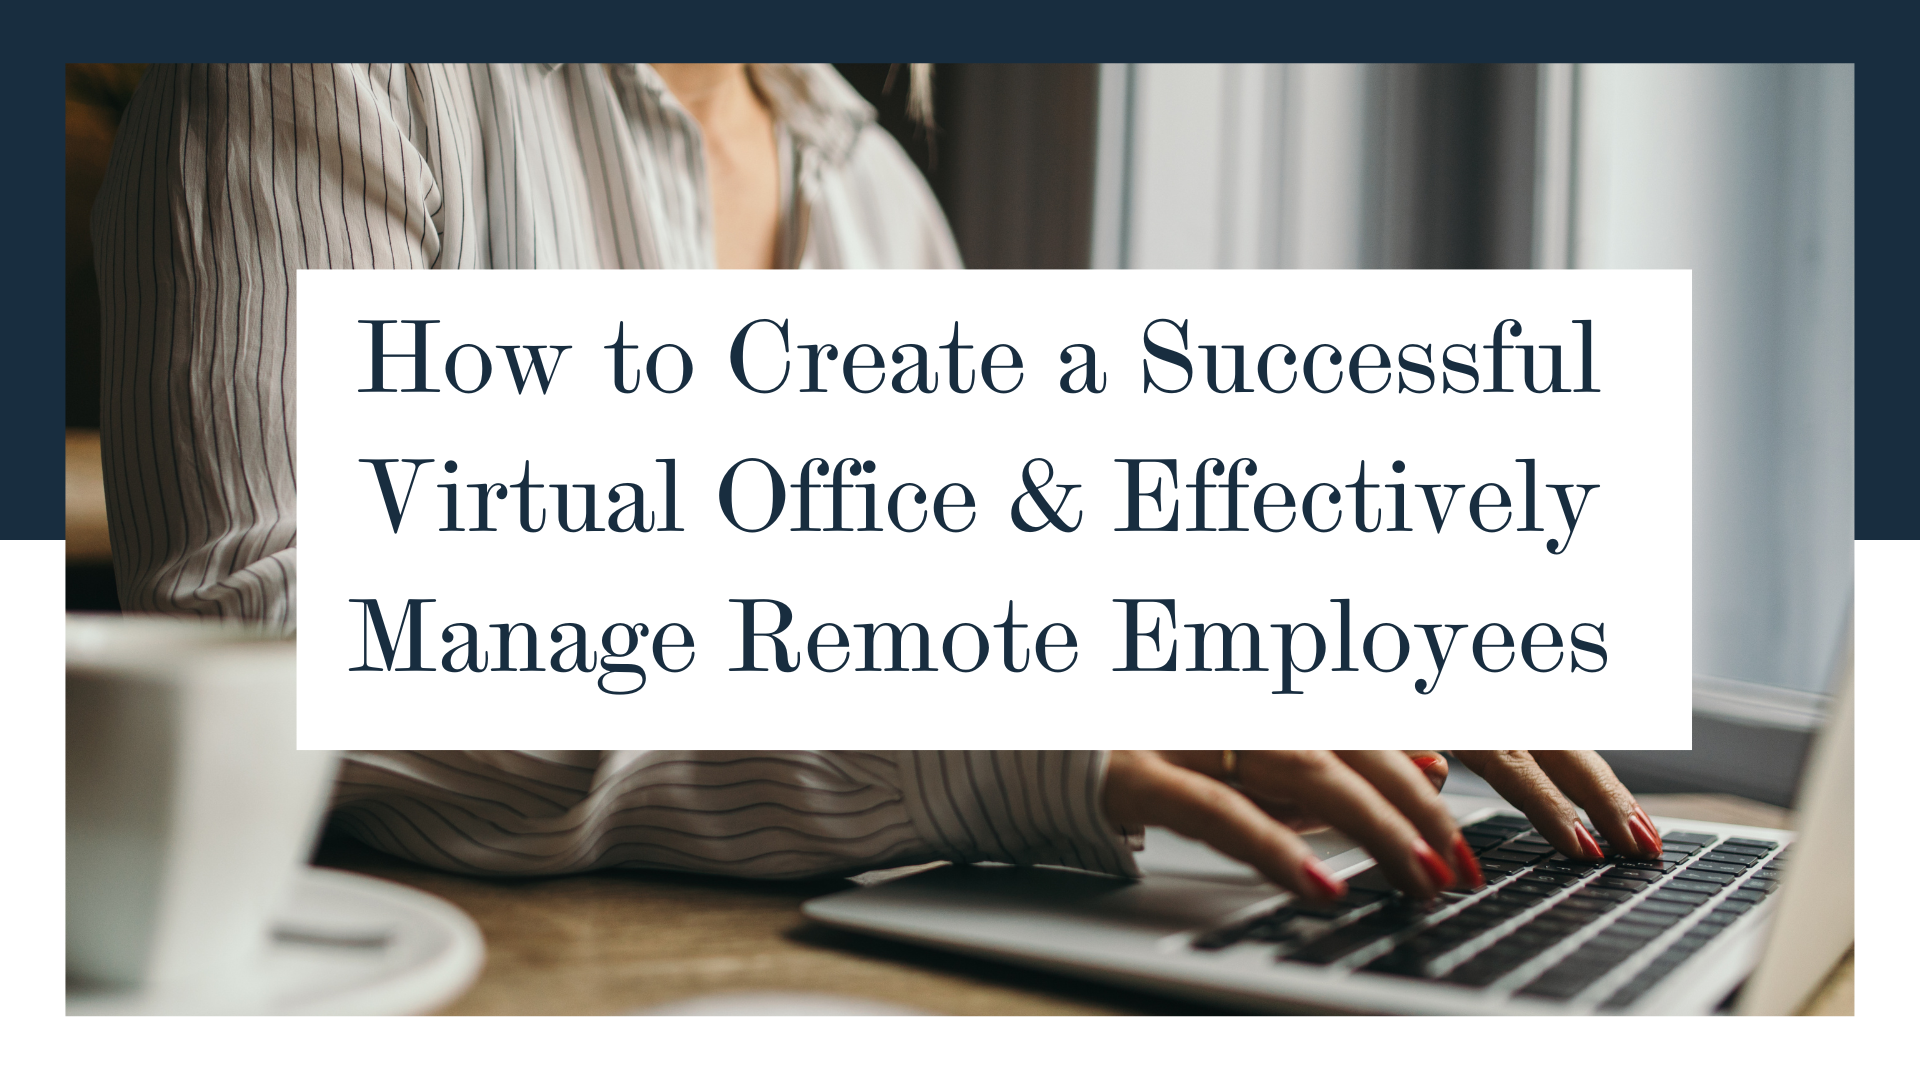 Virtual Office And Managing Remote Employees